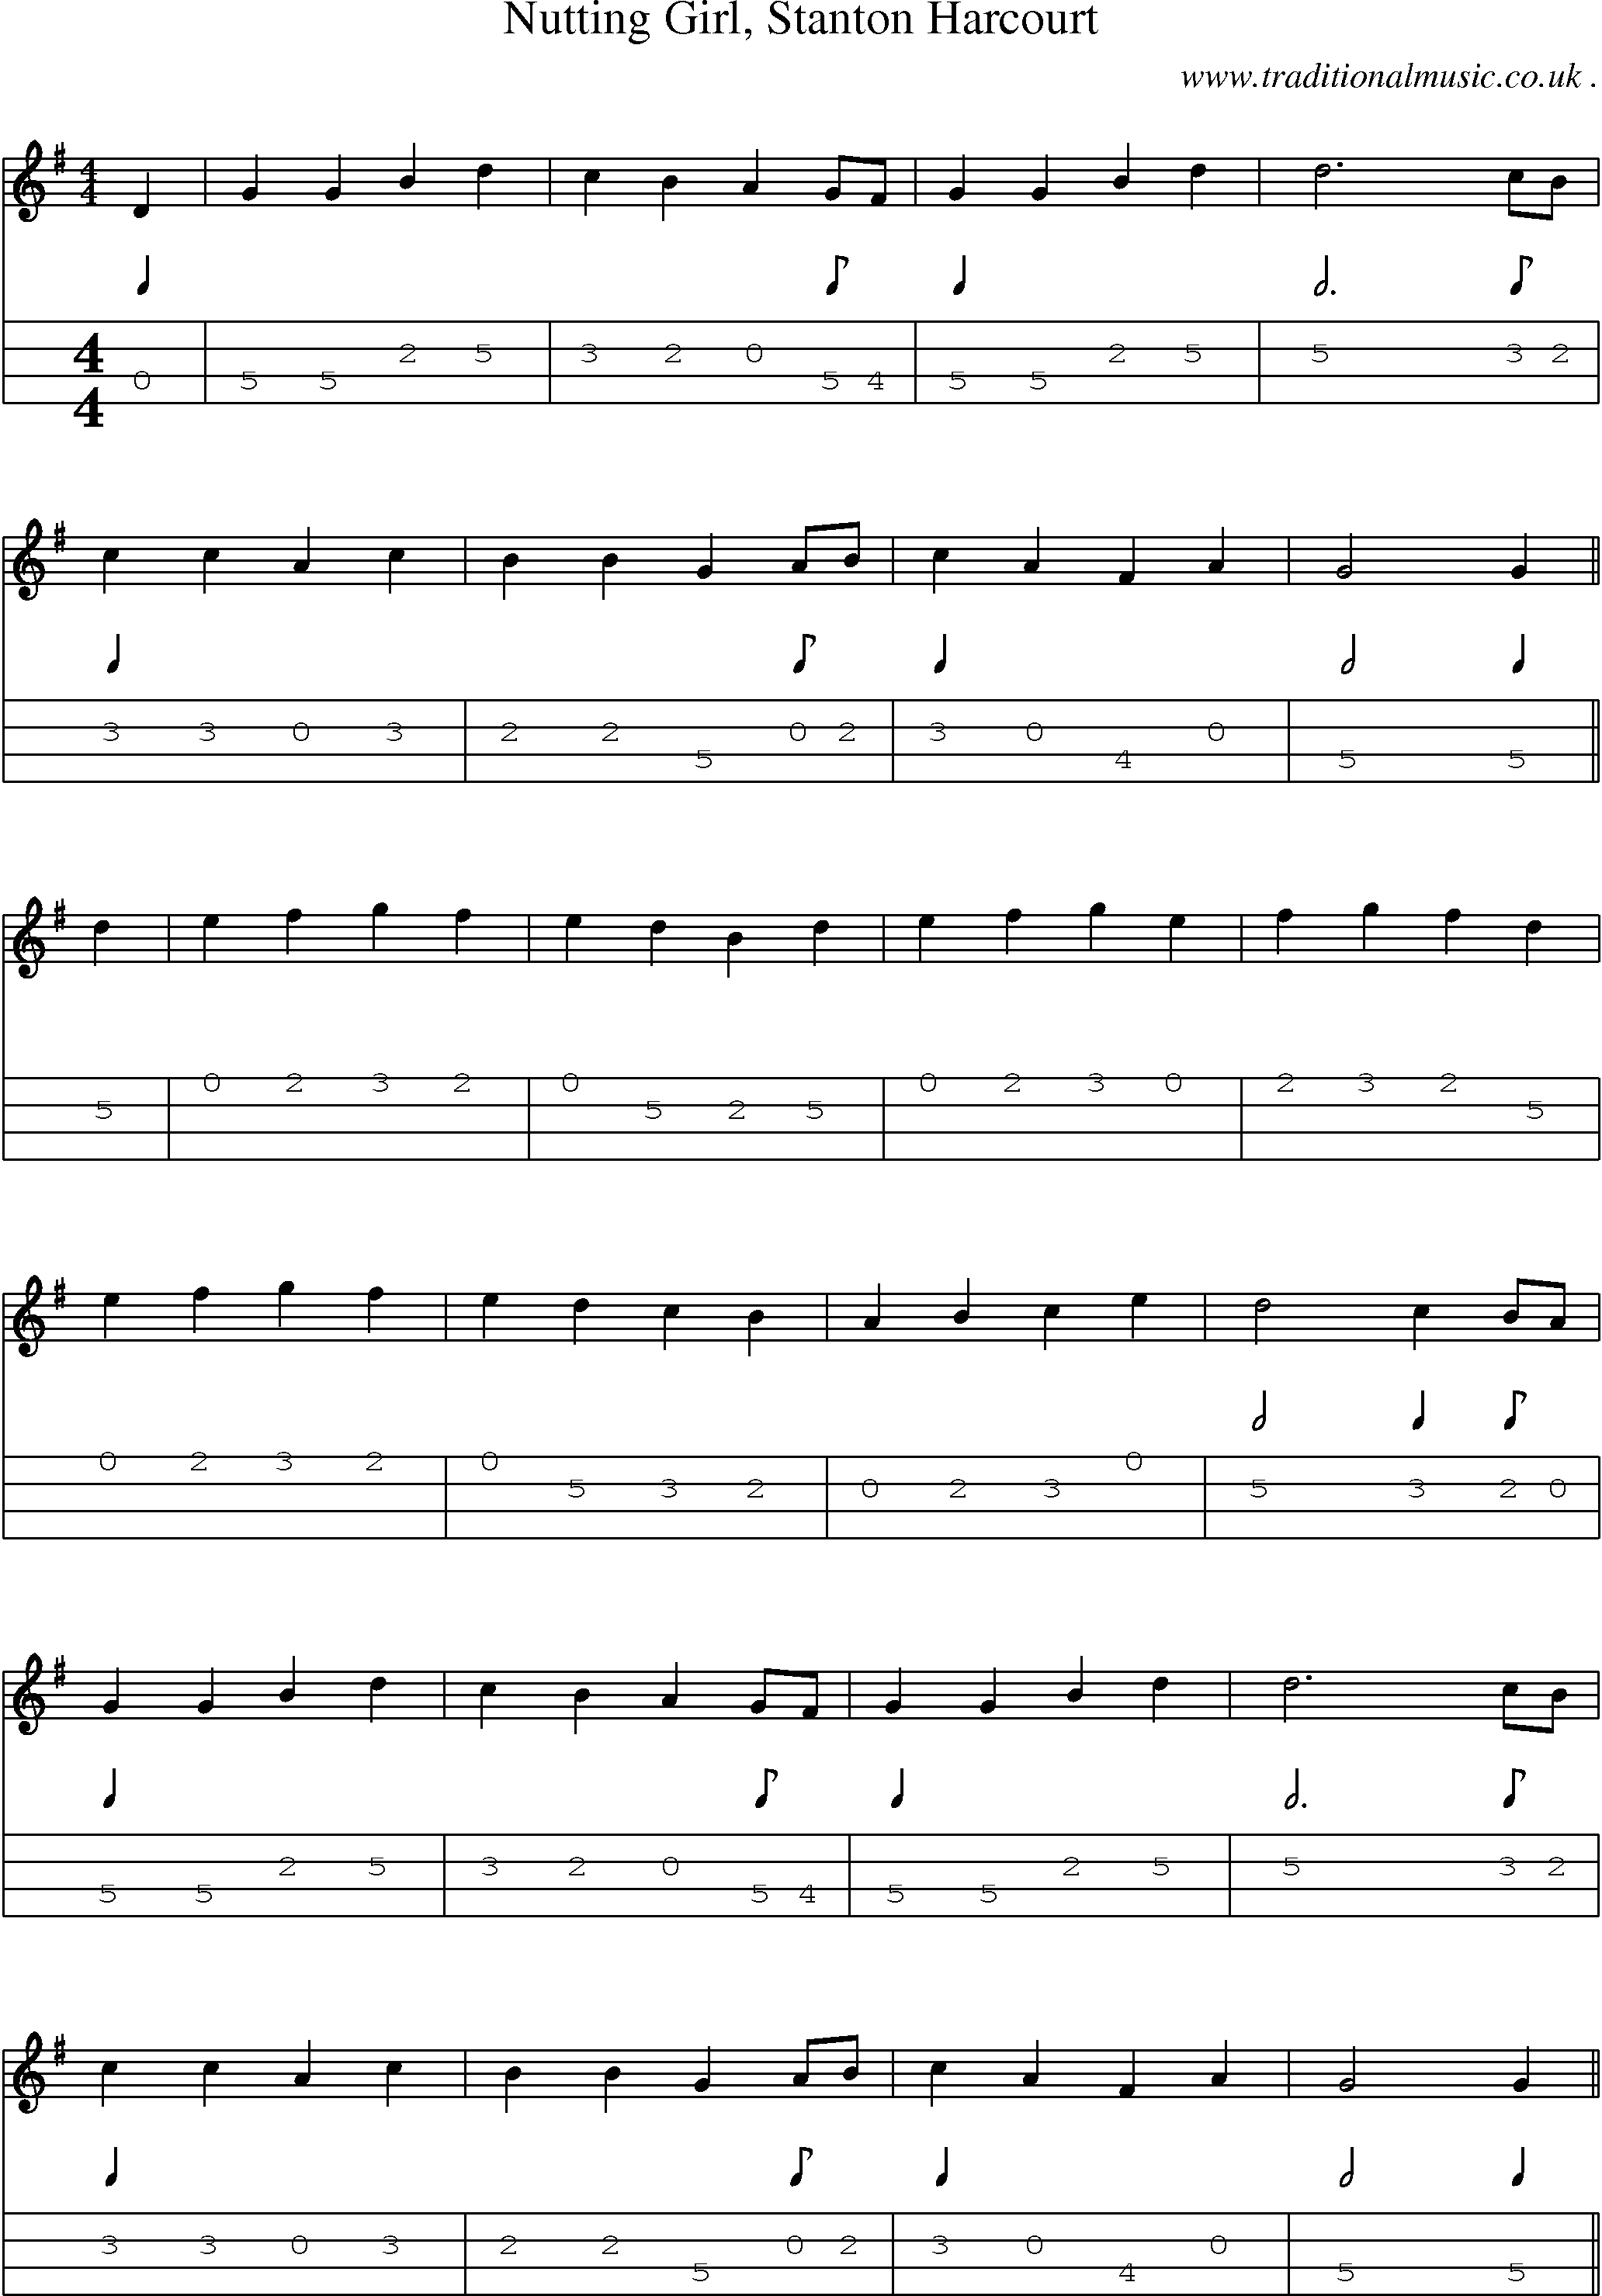 Sheet-Music and Mandolin Tabs for Nutting Girl Stanton Harcourt